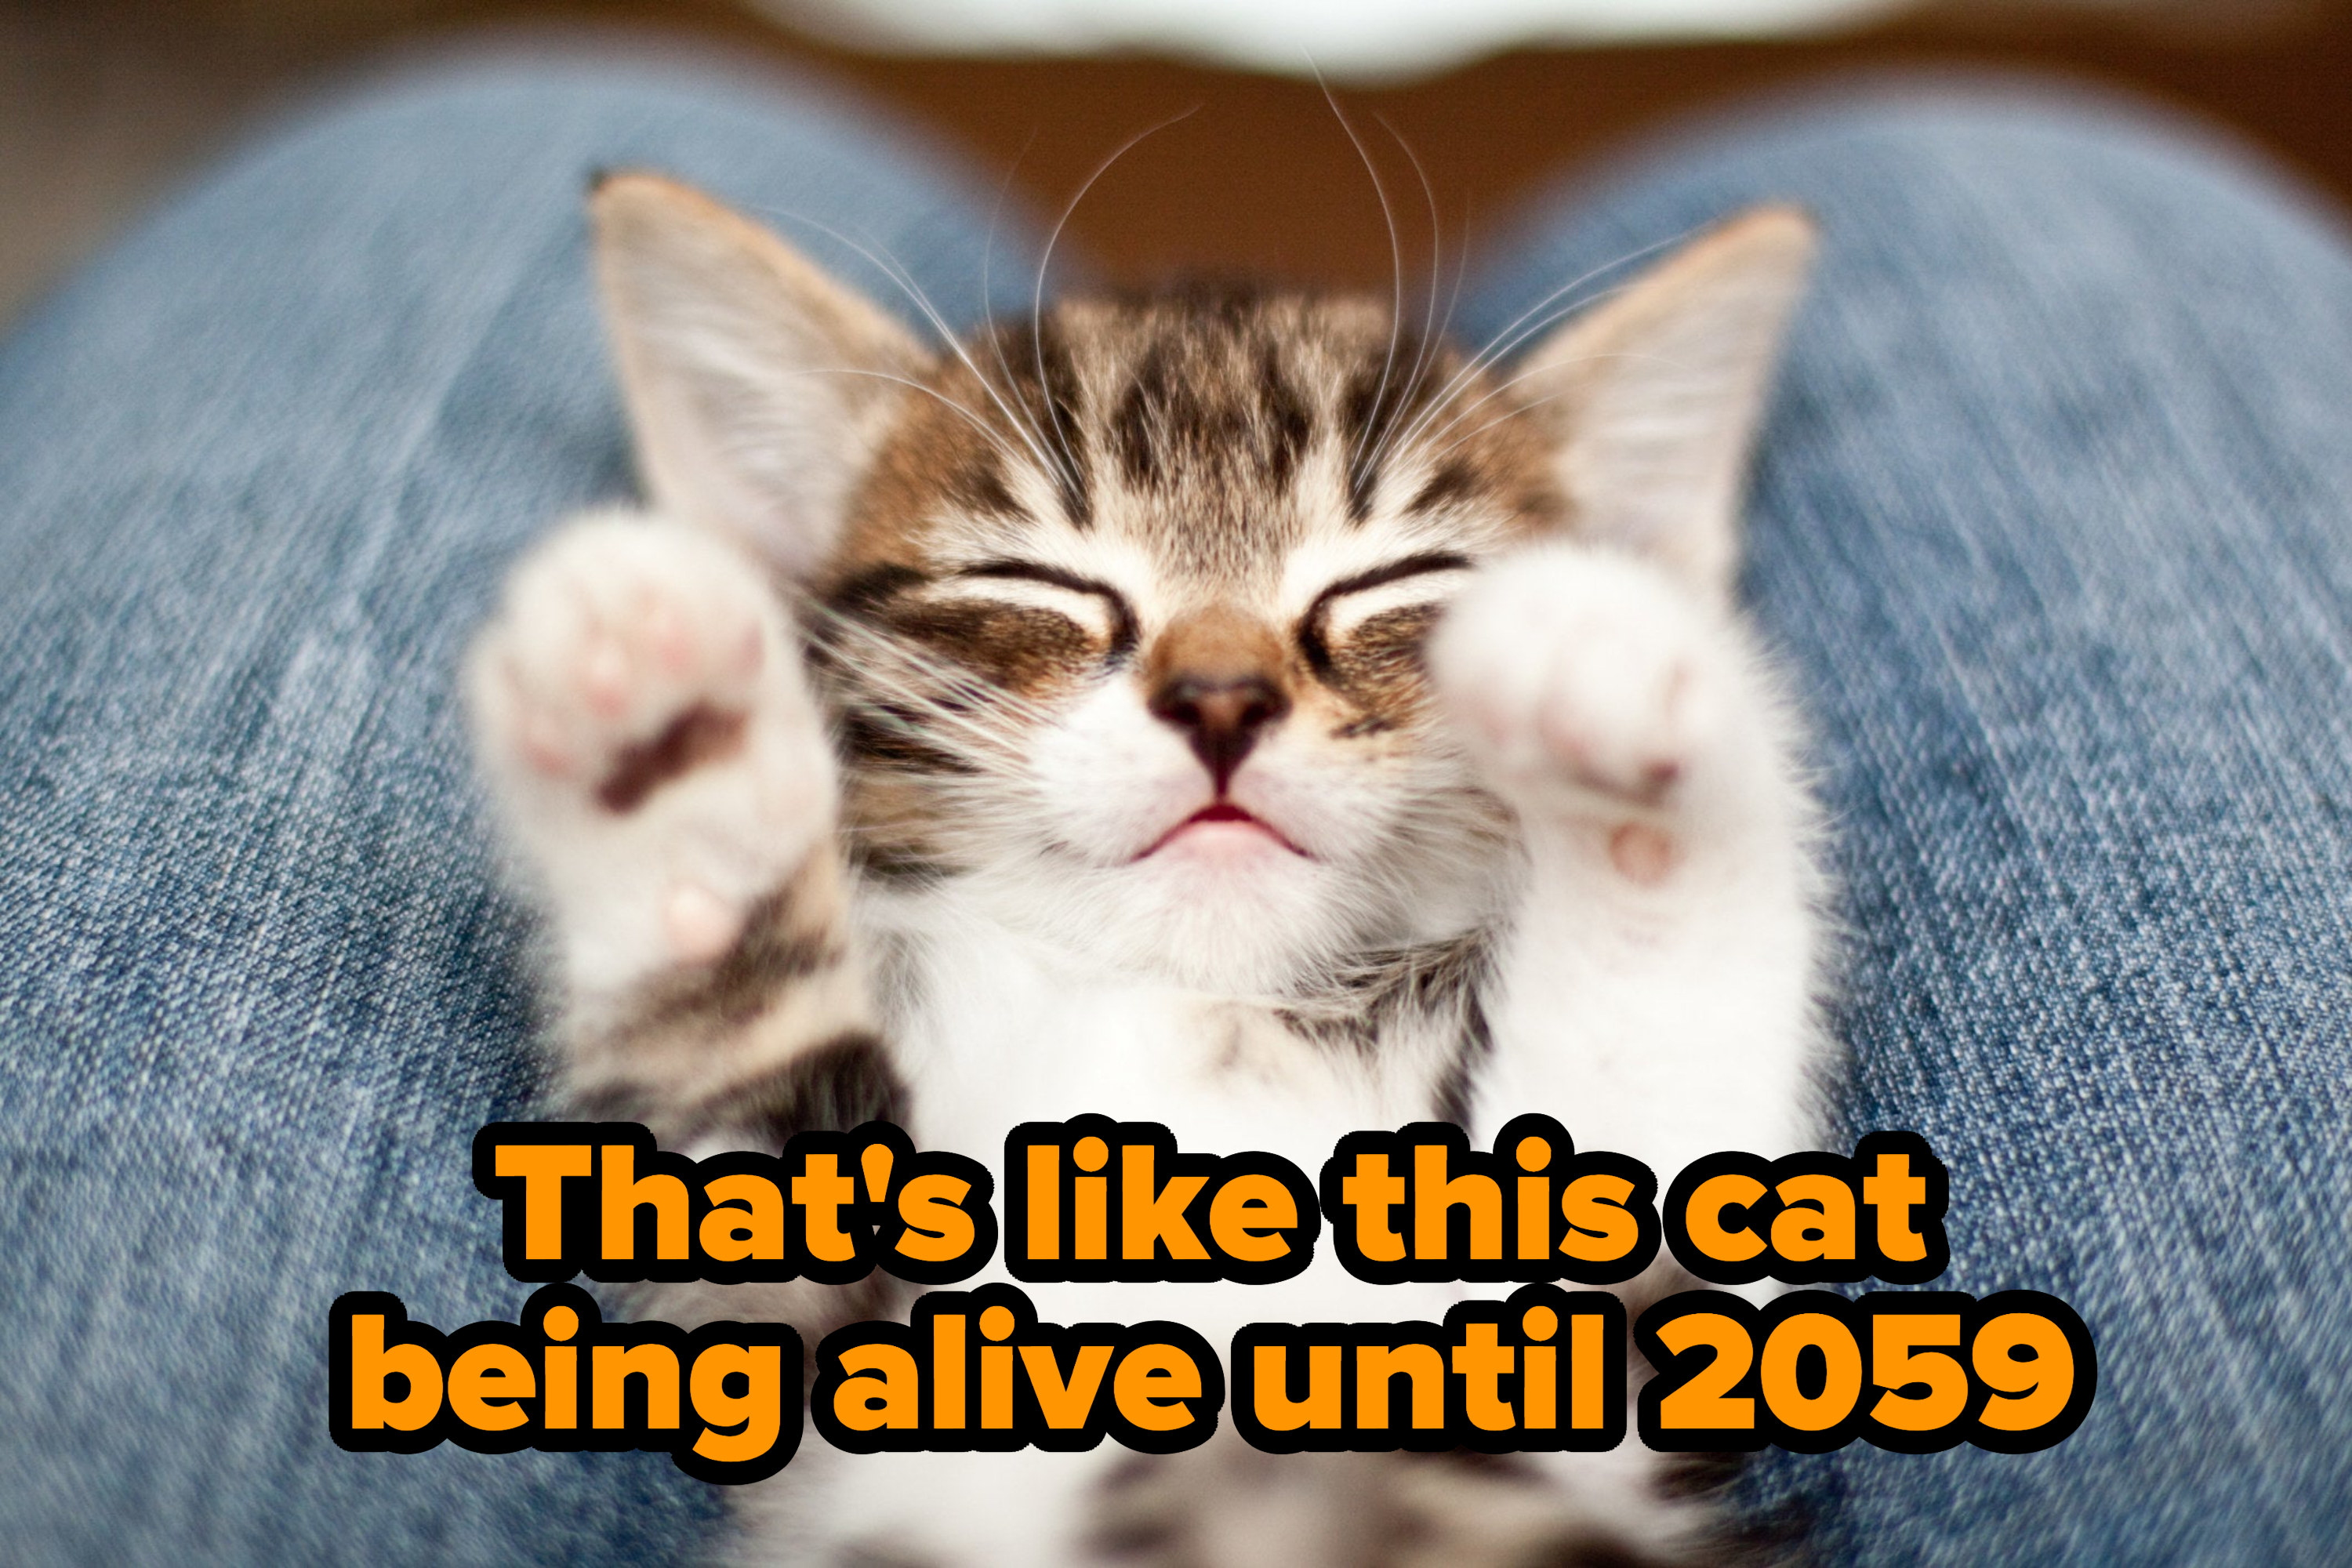 Written over a kitten on someone&#x27;s lap: &quot;That&#x27;s like this cat being alive until 2059&quot;